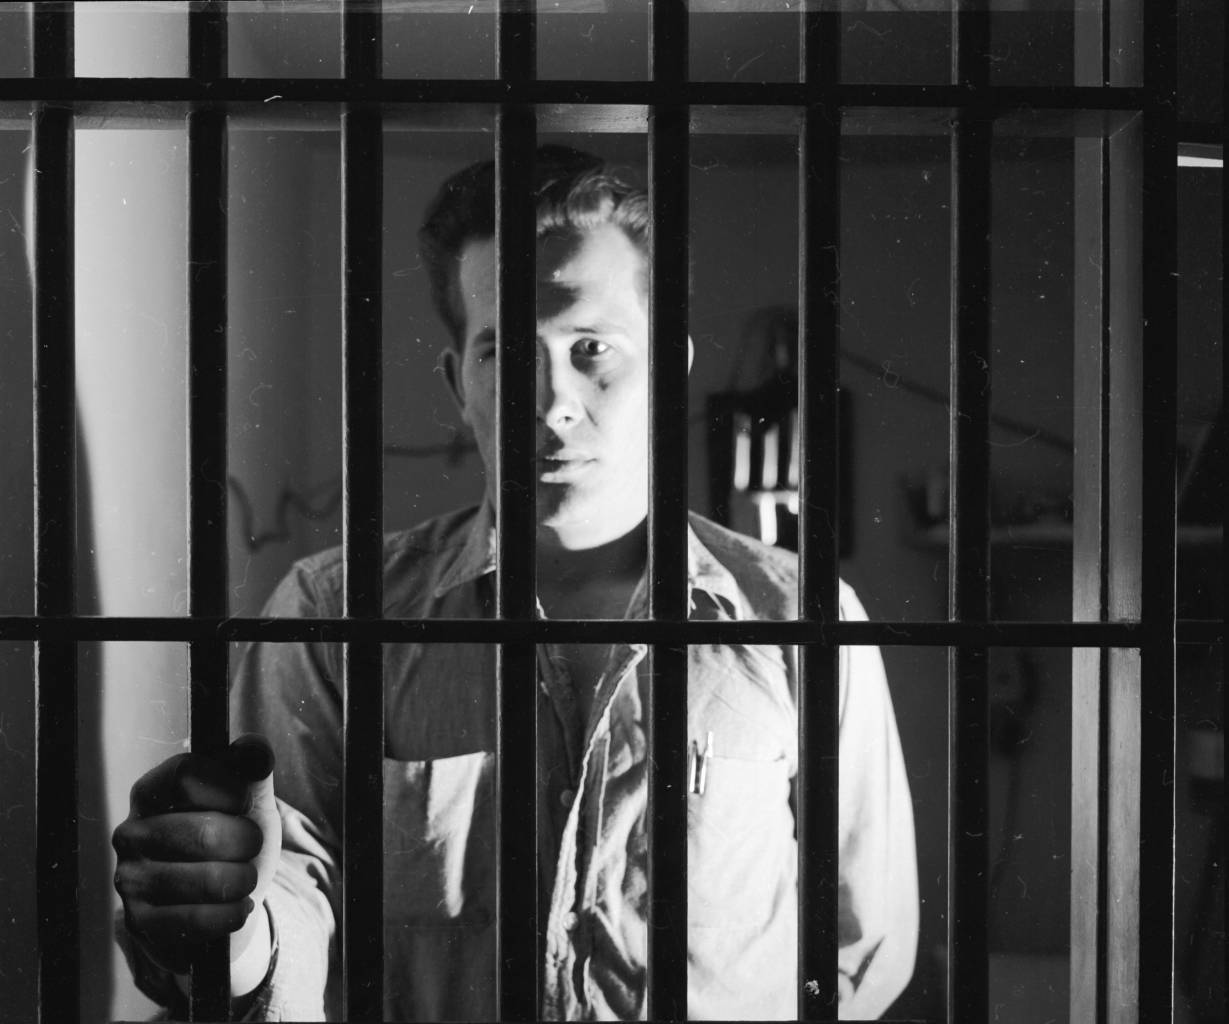 circa 1956: Prisoner Paul Harris in his cell at Iowa State Prison. (Photo by Three Lions/Getty Images)